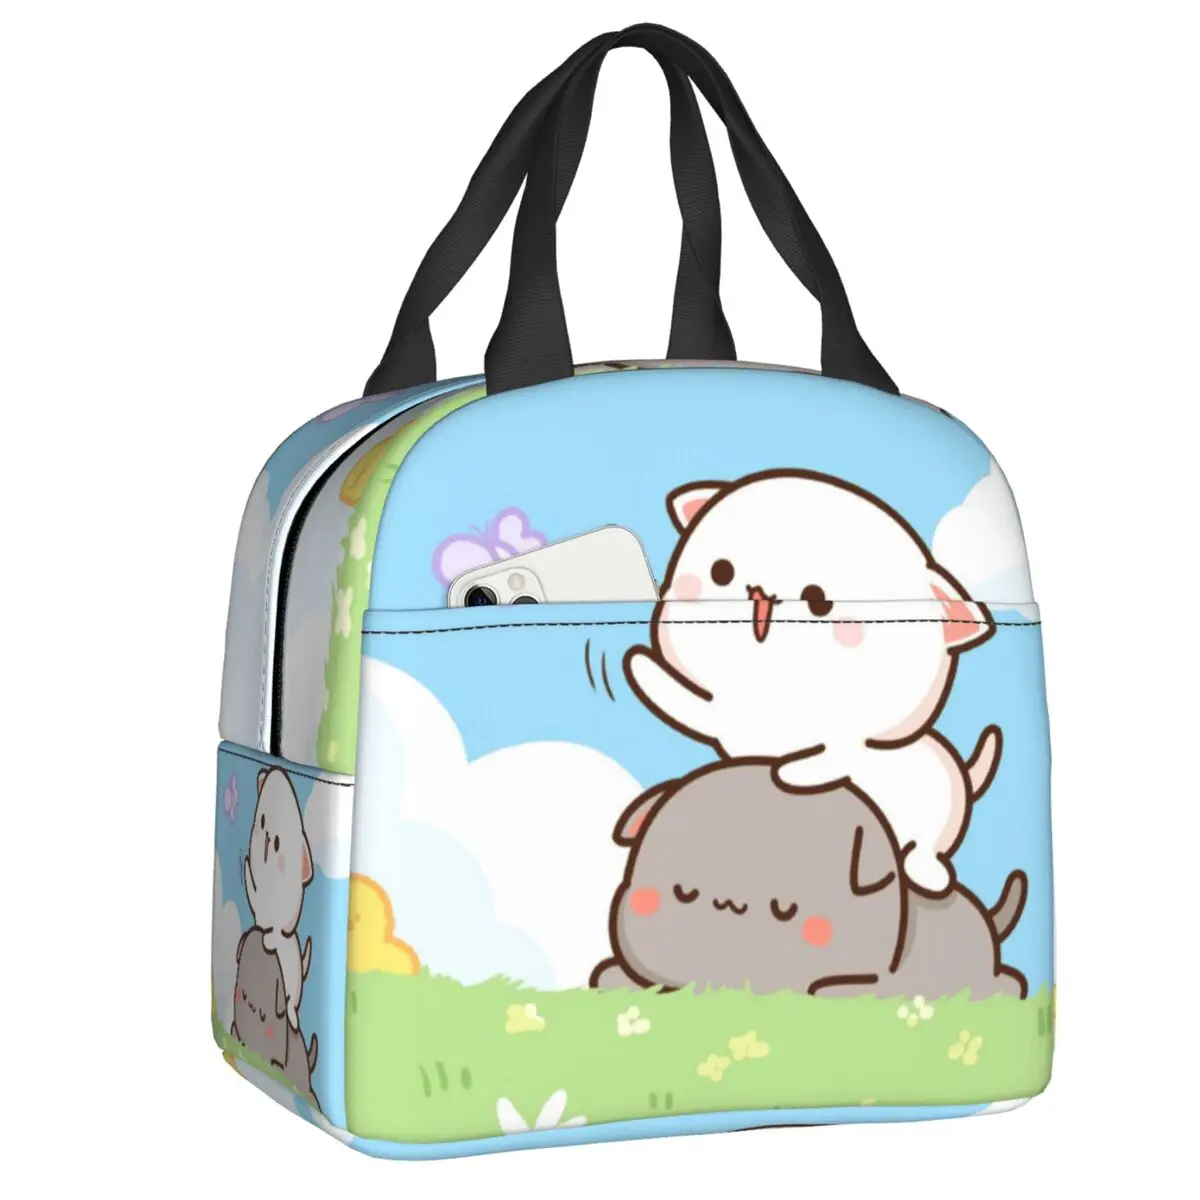 

Peach And Goma Insulated Lunch Tote Bag for Women Resuable Cooler Thermal Mochi Cat Bento Box School Work Picnic Food Lunch Box